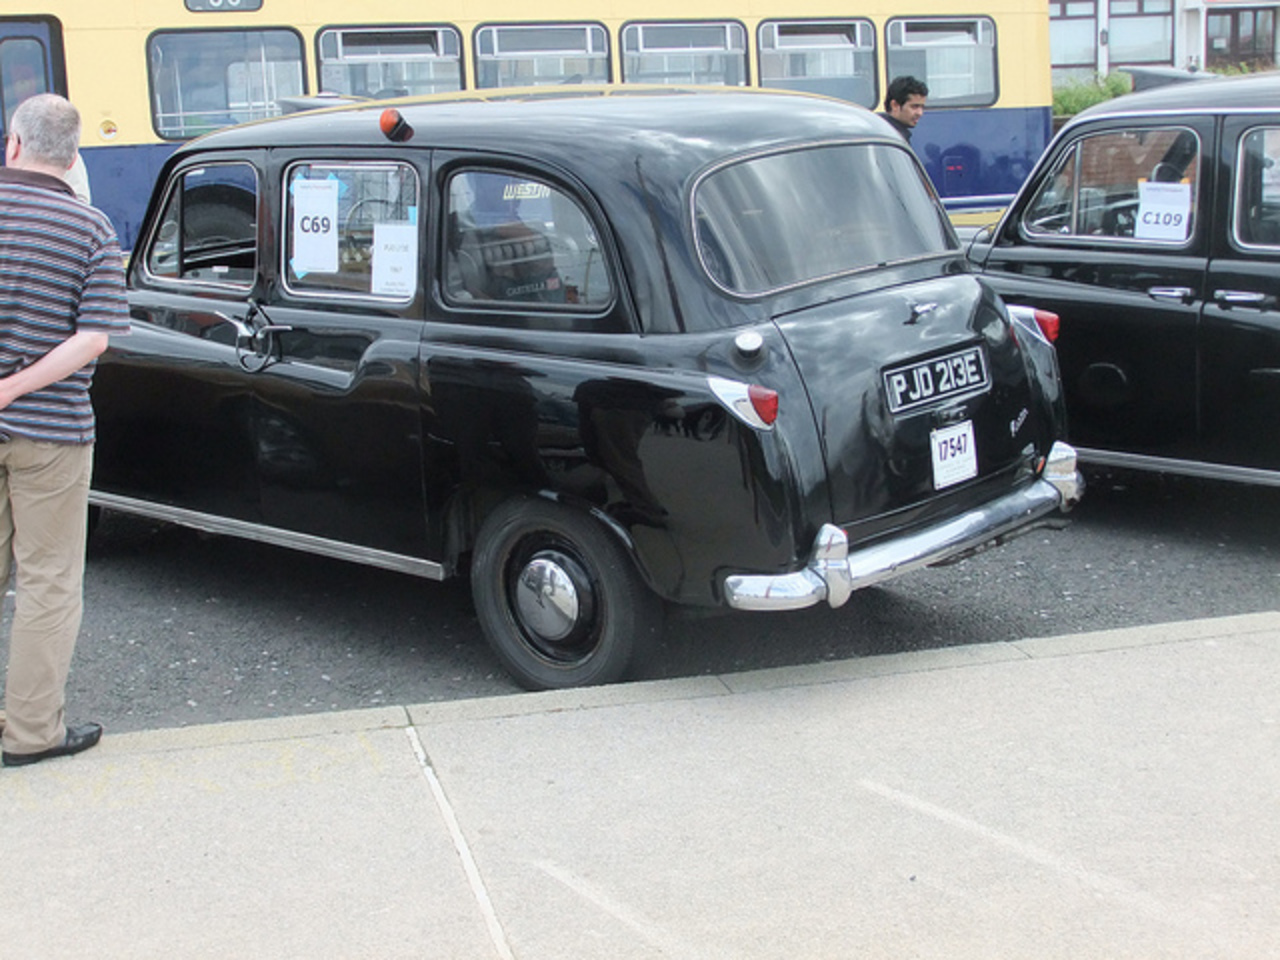 EARLY AUSTIN FX4 TAXI BLACKPOOL 2011 | Flickr - Photo Sharing!